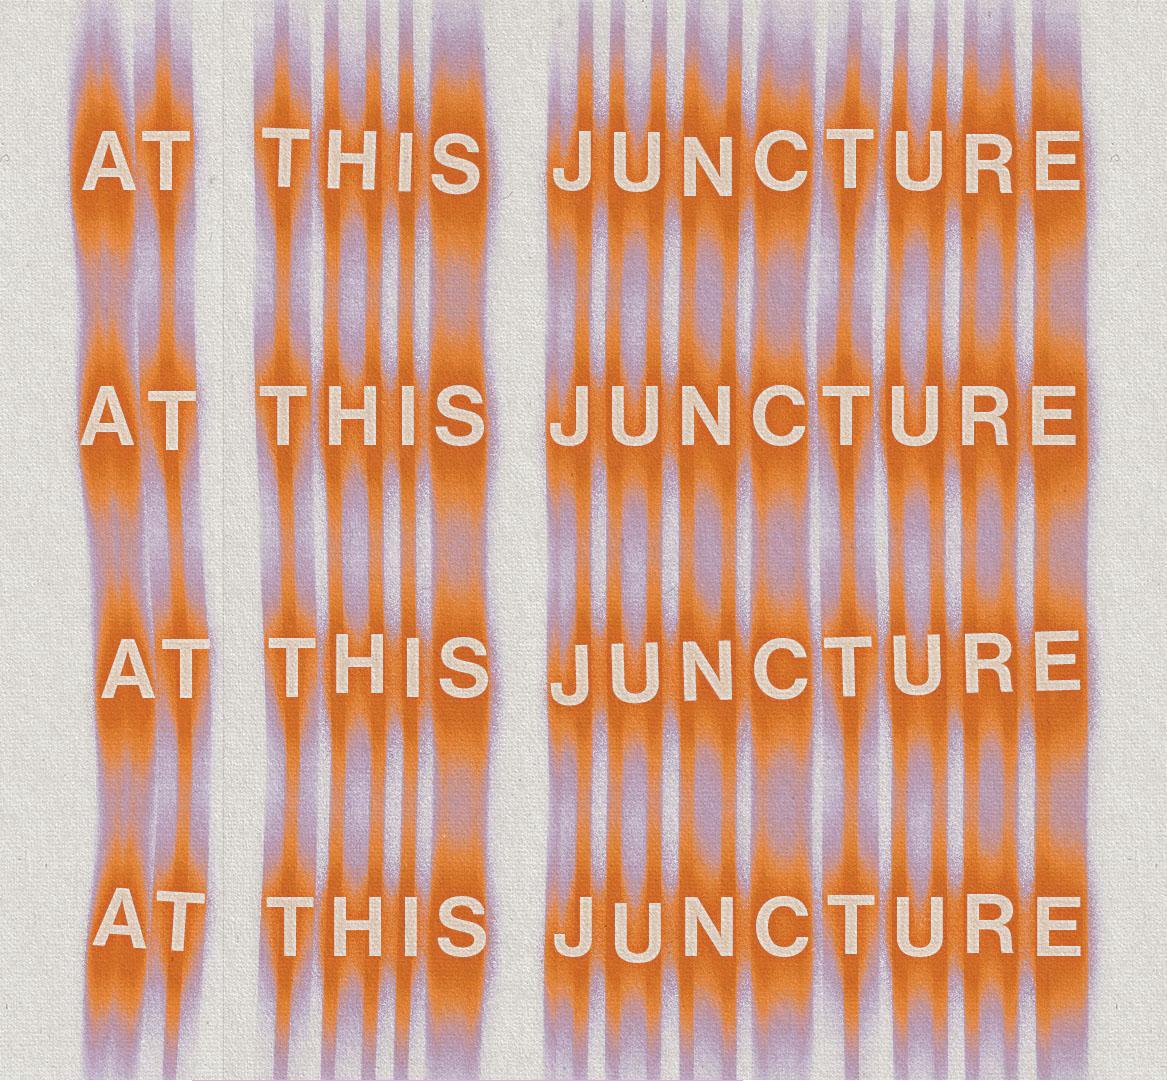 The words "at this juncture" with each letter on a vertical stripe, repeated vertically 4 times